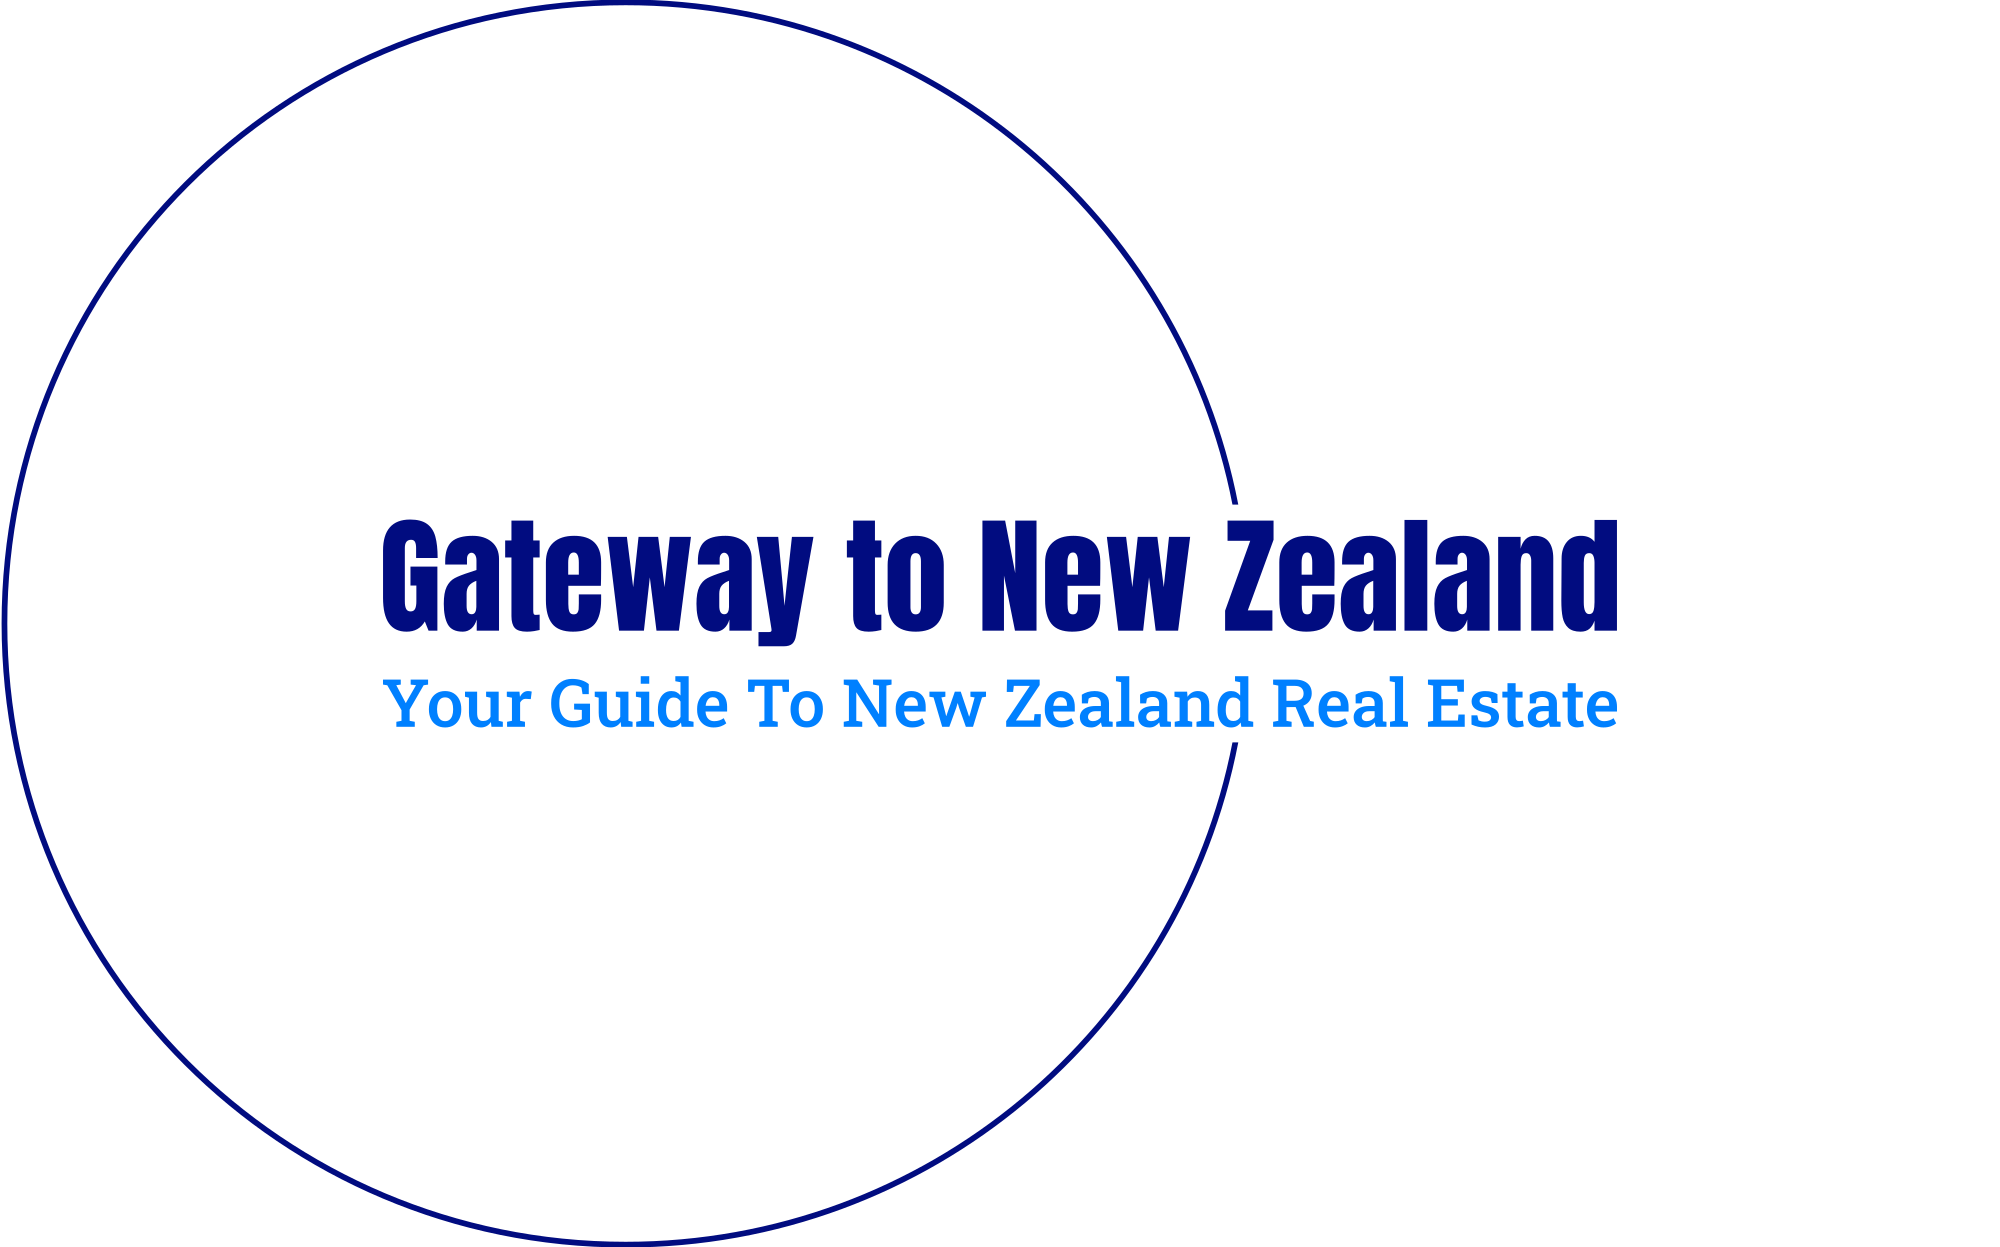 New Zealand Real Estate